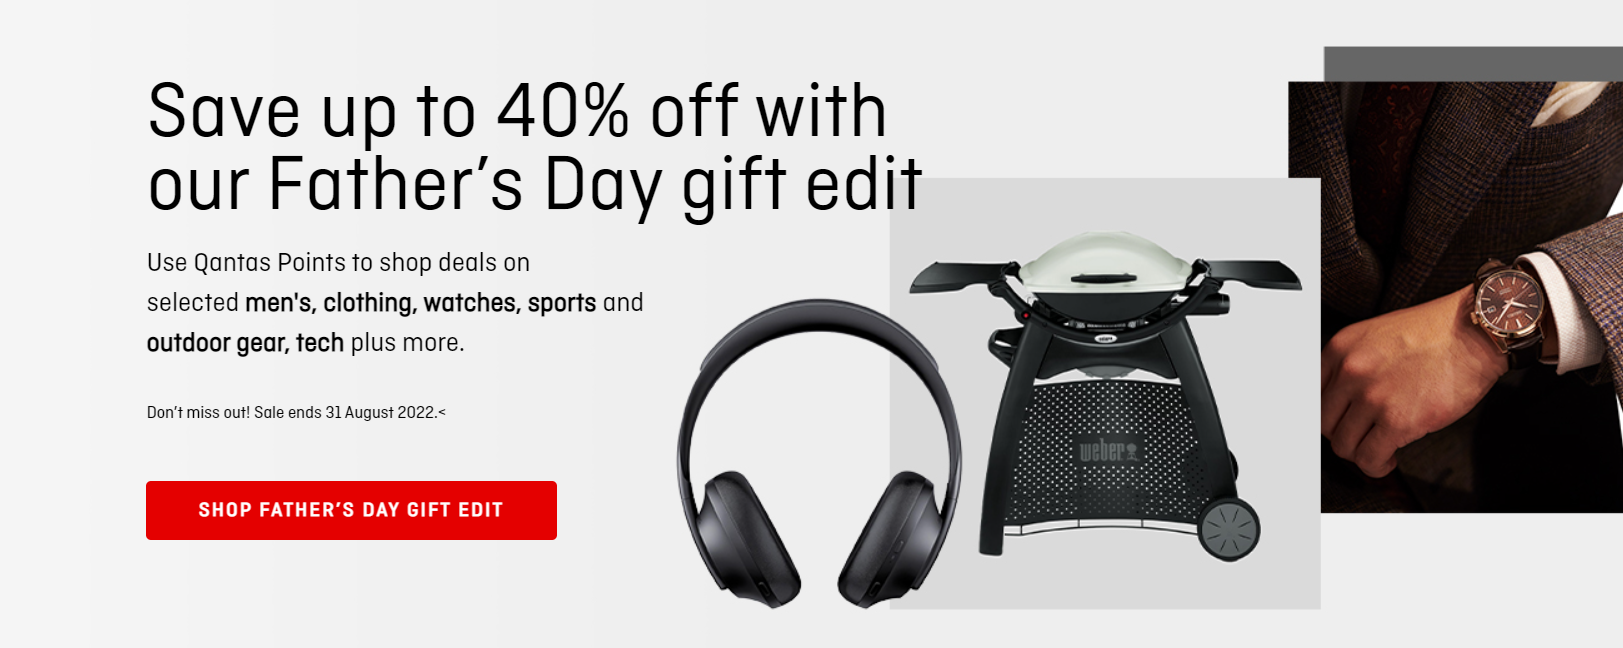 Up to 40% OFF on Father's Day gifts at Qantas Reward Store